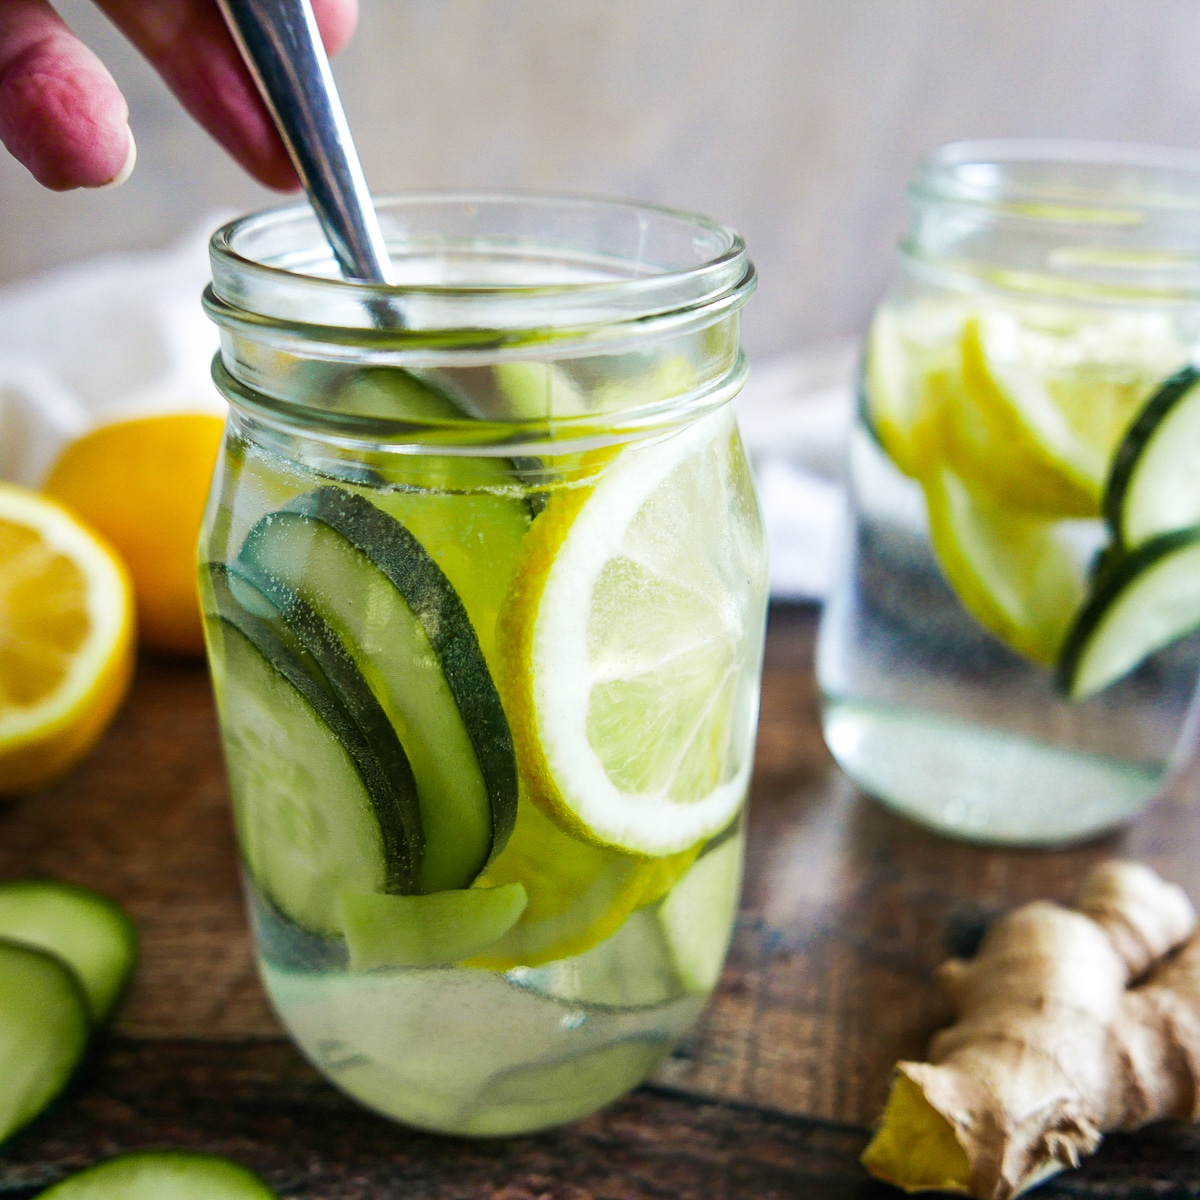 spoon stirring jar of water with sliced lemons and cucumber. 